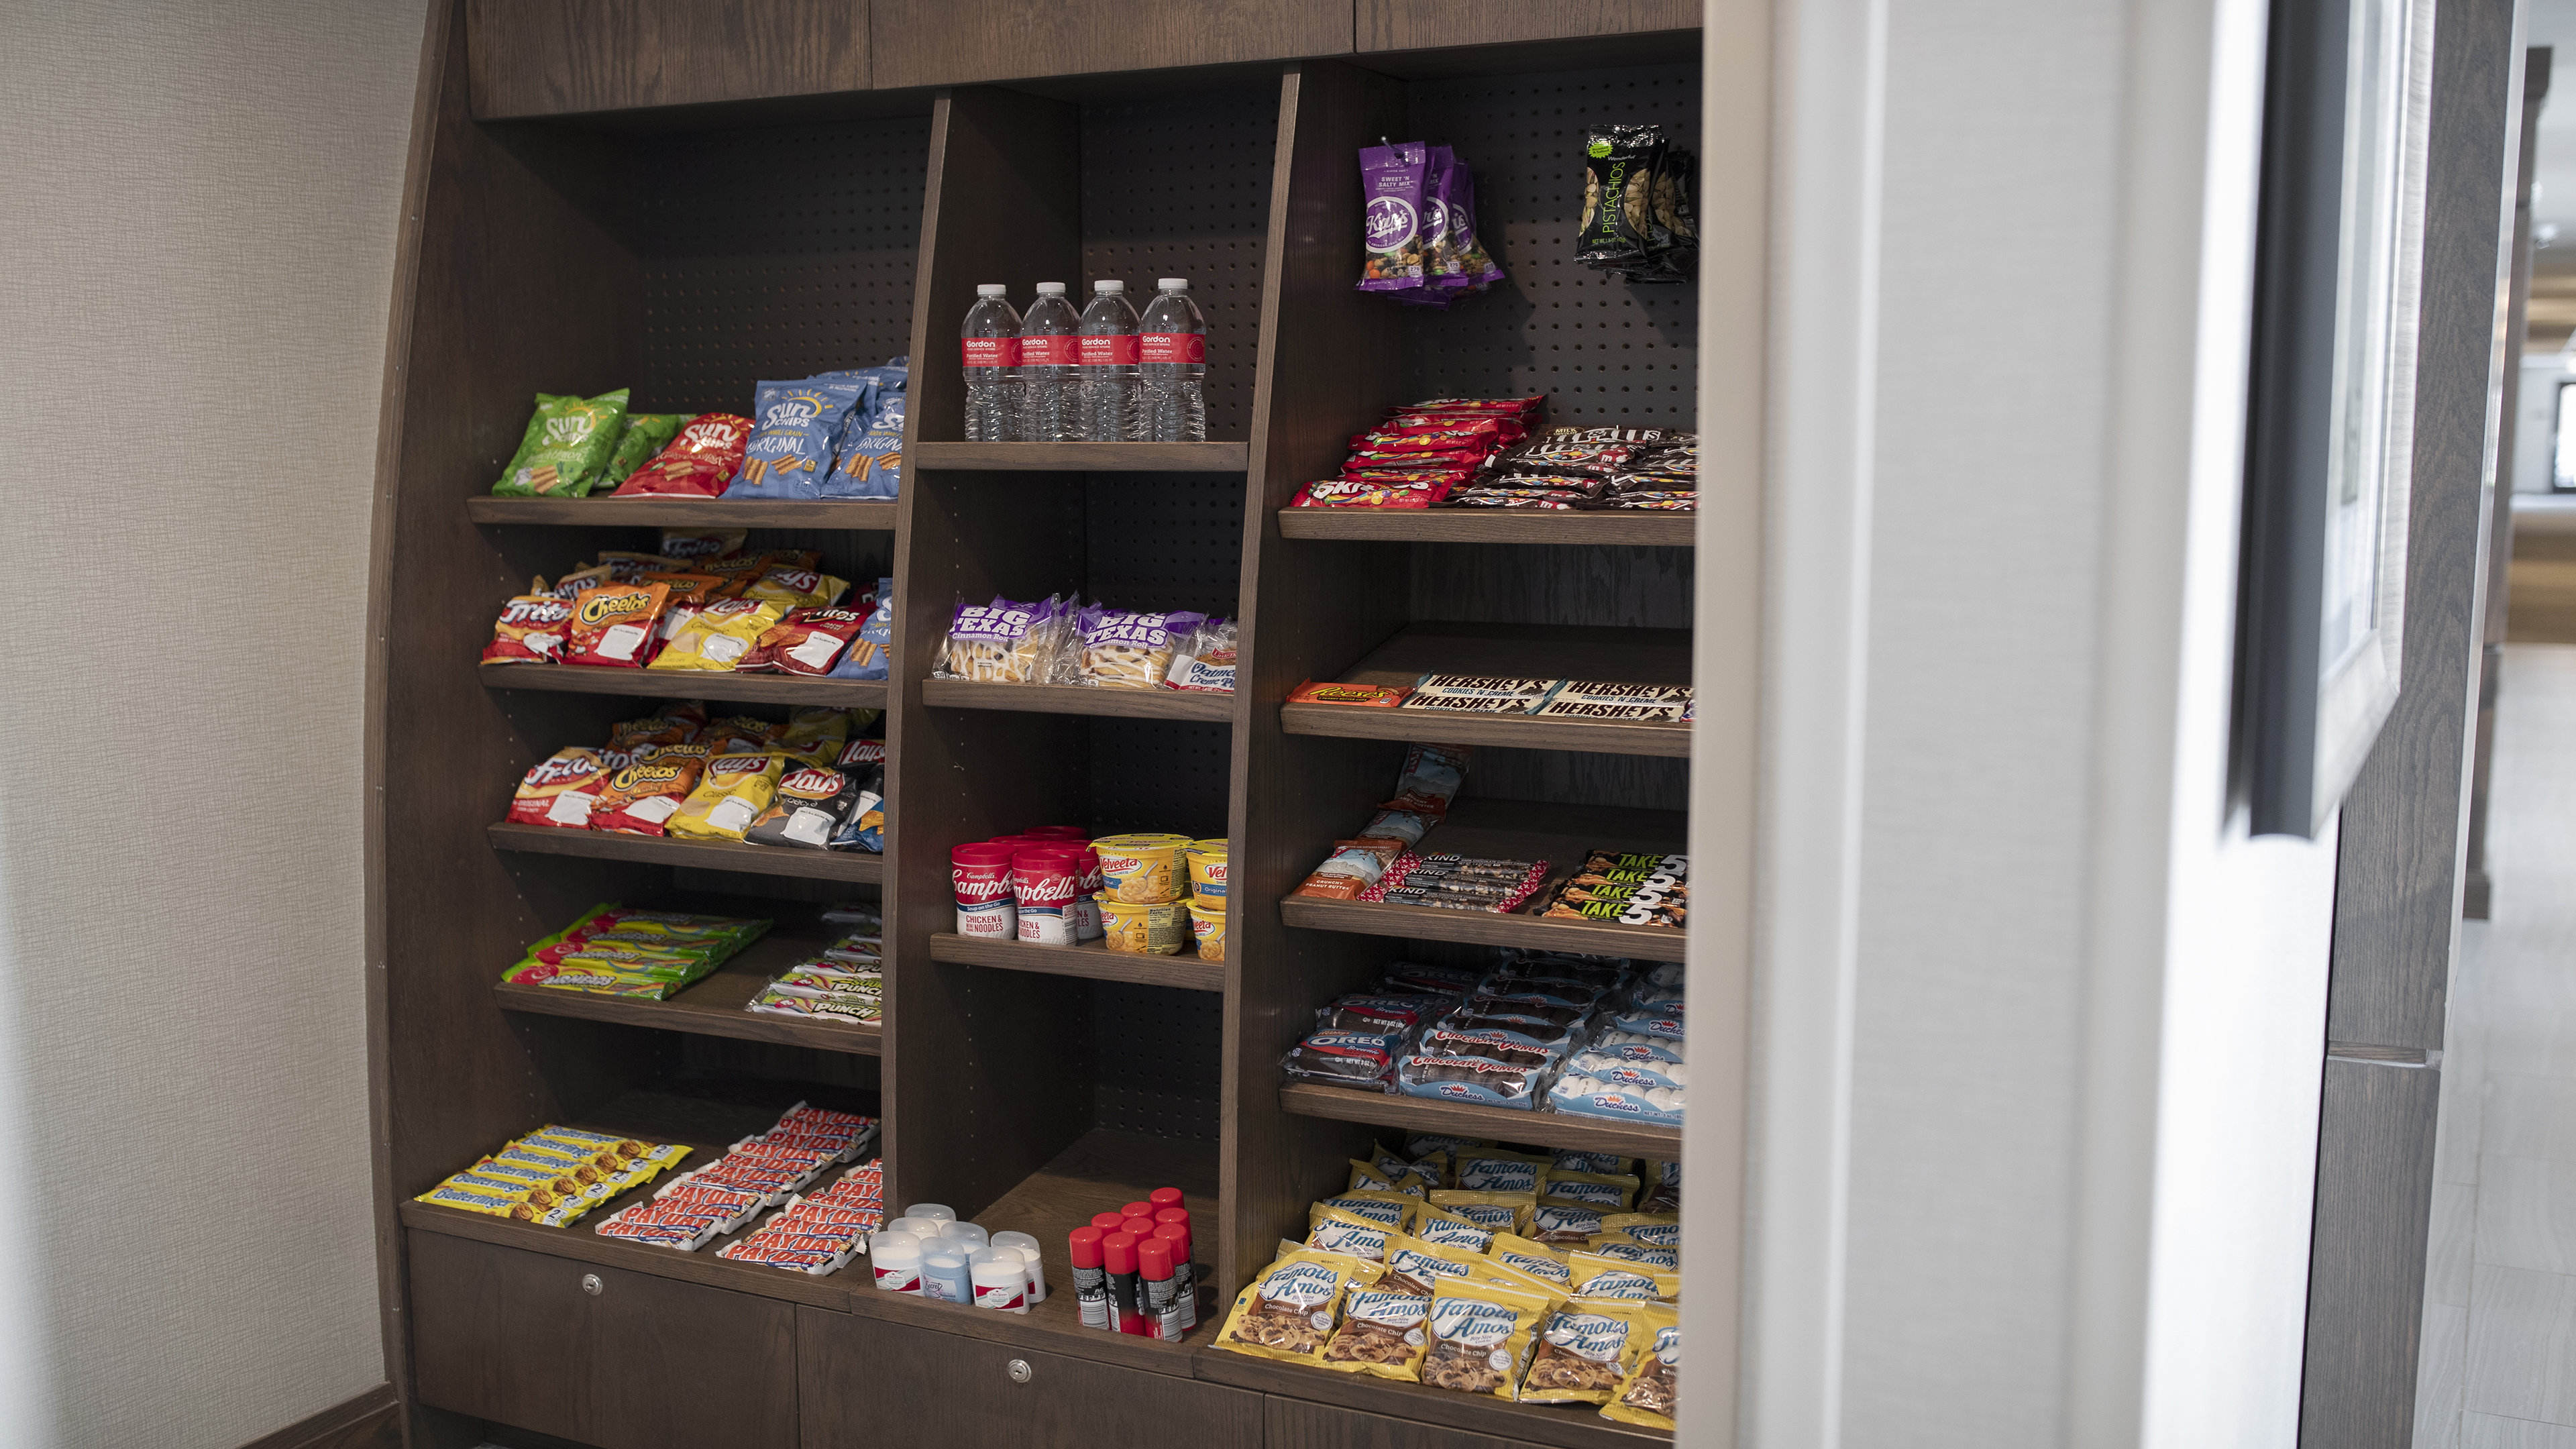 Snacks & drinks for purchase 24/7 at the Staybridge Suites Pantry